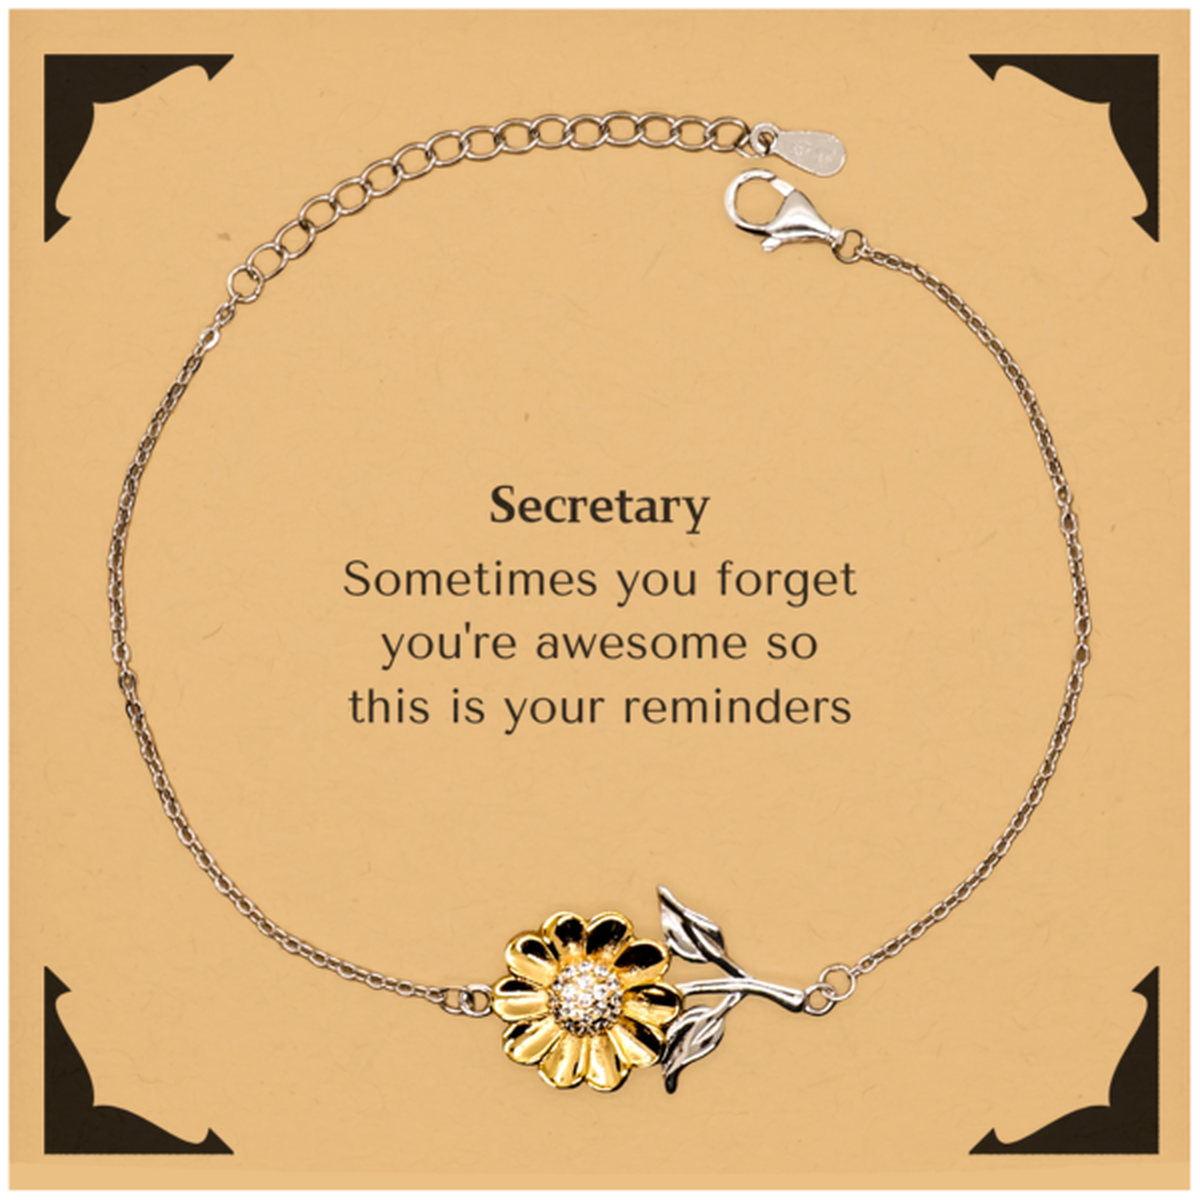 Sentimental Secretary Sunflower Bracelet, Secretary Sometimes you forget you're awesome so this is your reminders, Graduation Christmas Birthday Gifts for Secretary, Men, Women, Coworkers